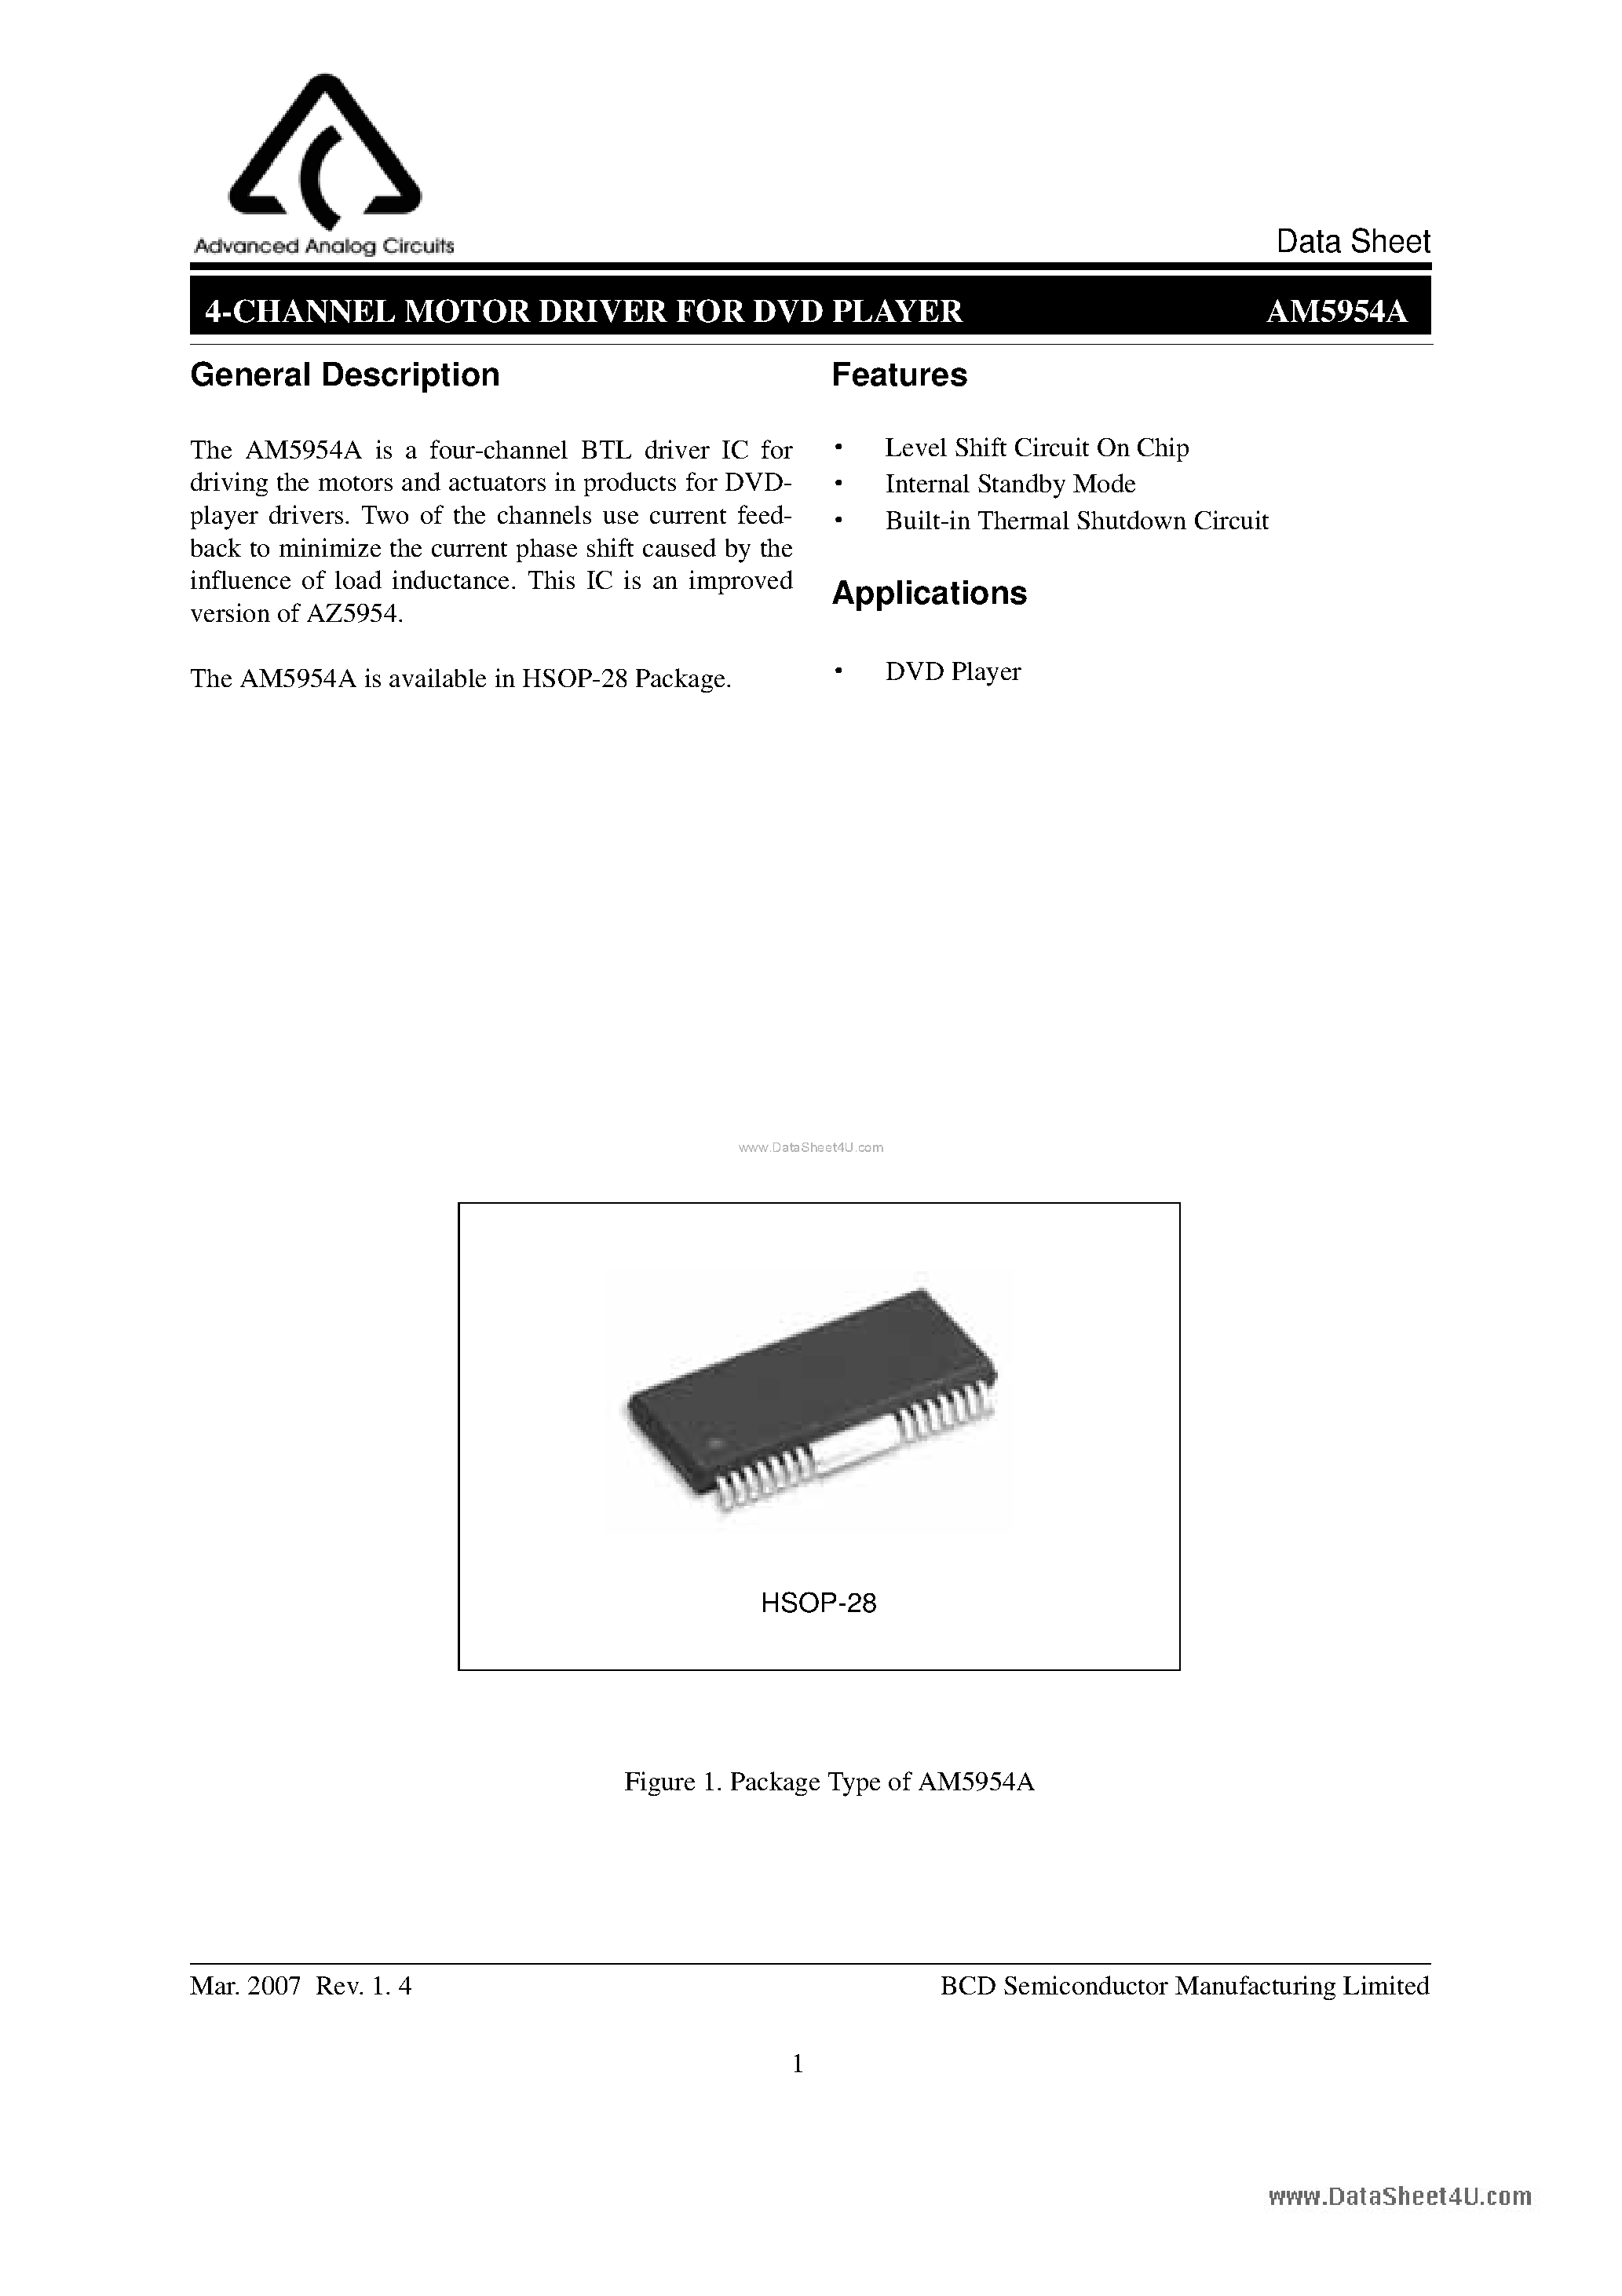 Datasheet AM5954A - 4-CHANNEL MOTOR DRIVER page 1